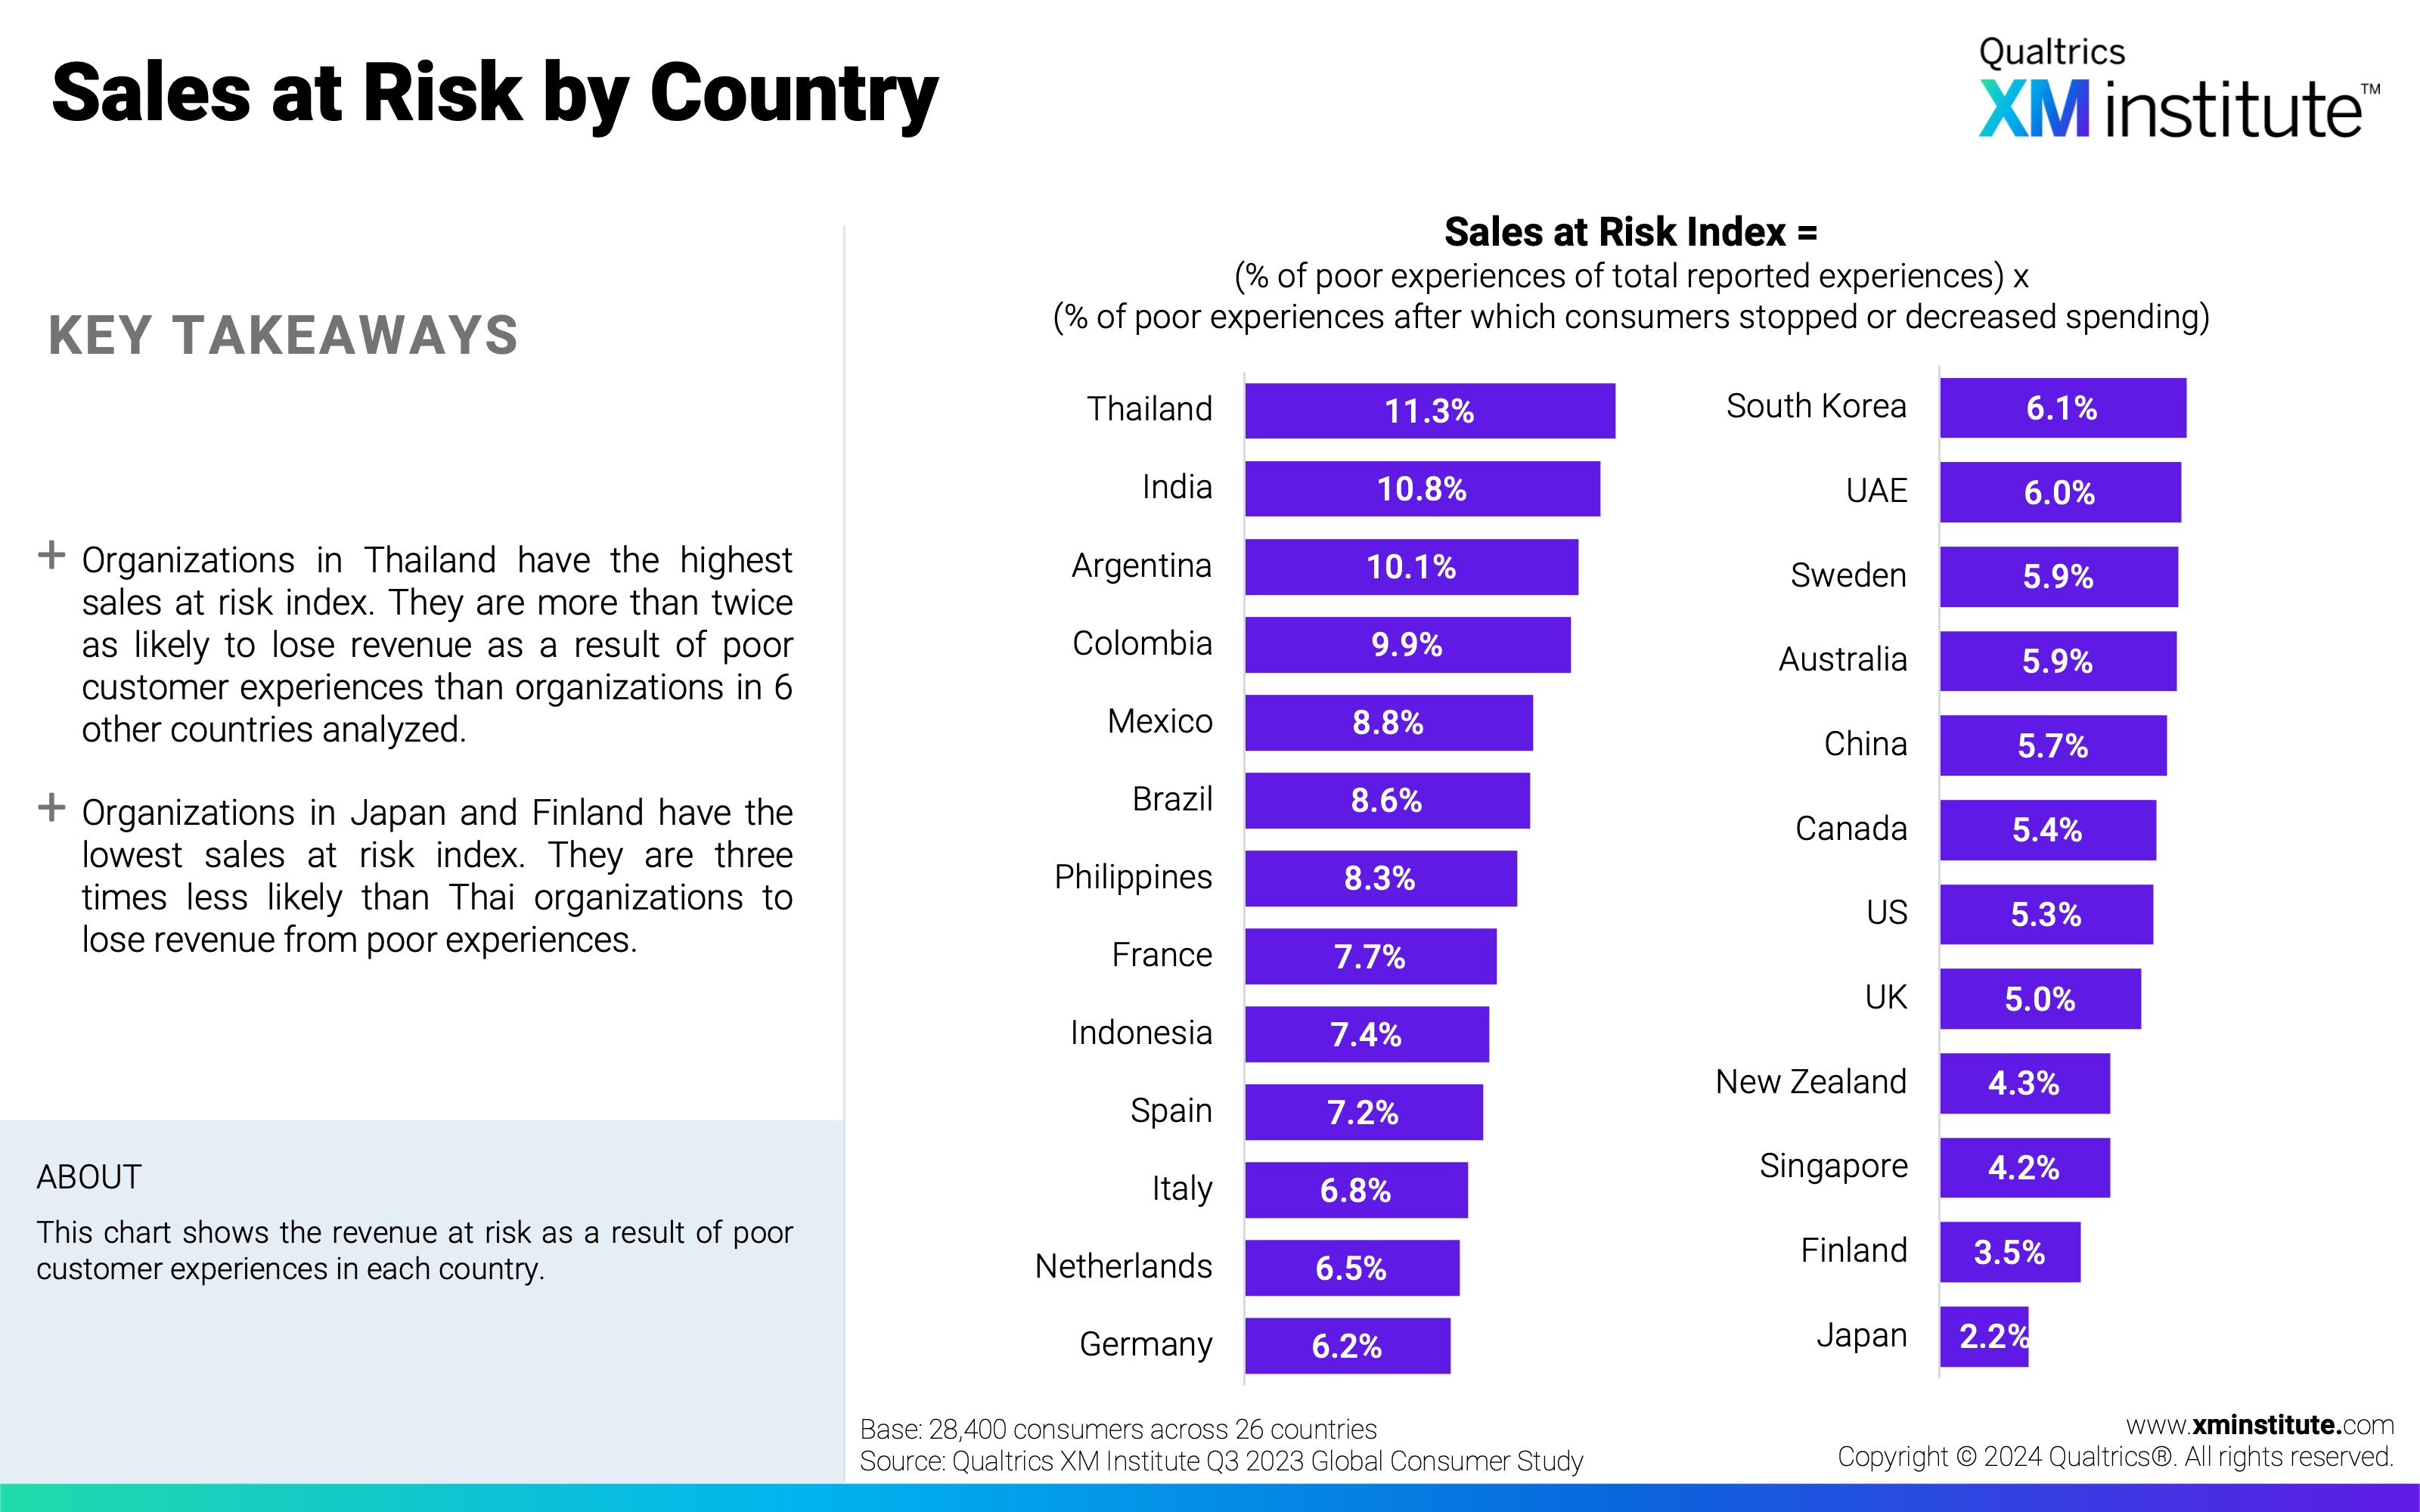 This chart shows the revenue at risk as a result of poor customer experiences in each country. 